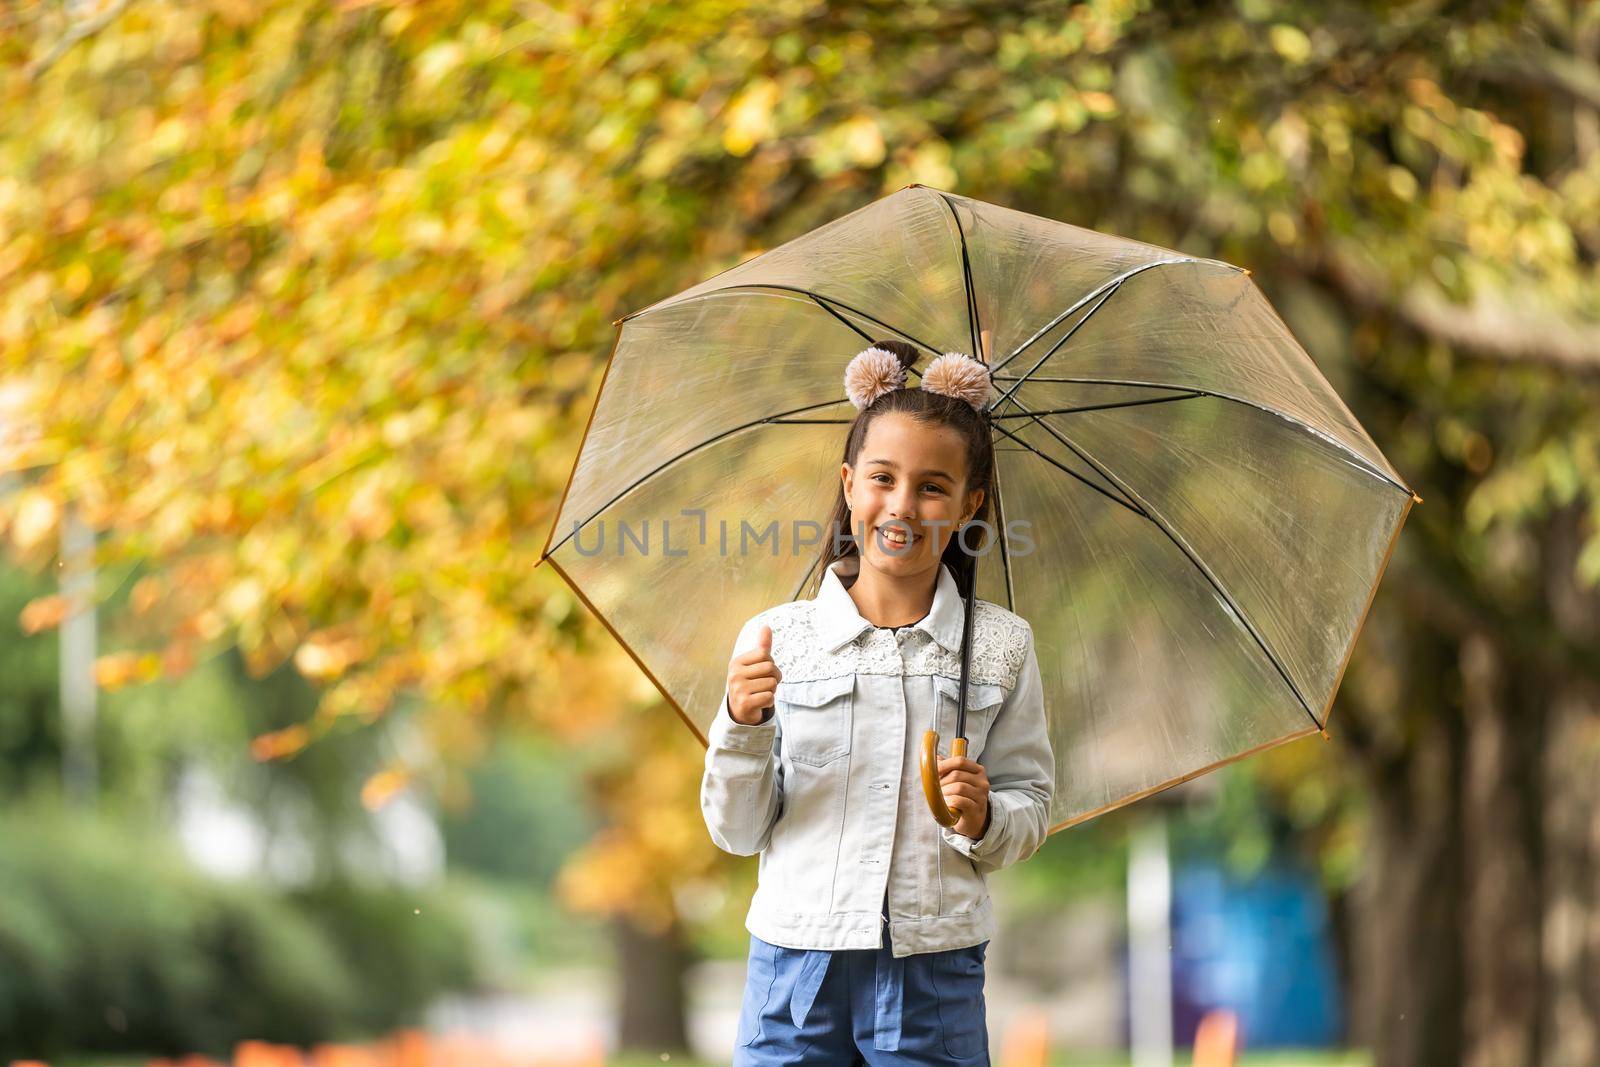 Kid playing out in the rain. Children with umbrella play outdoors in rain. autumn weather